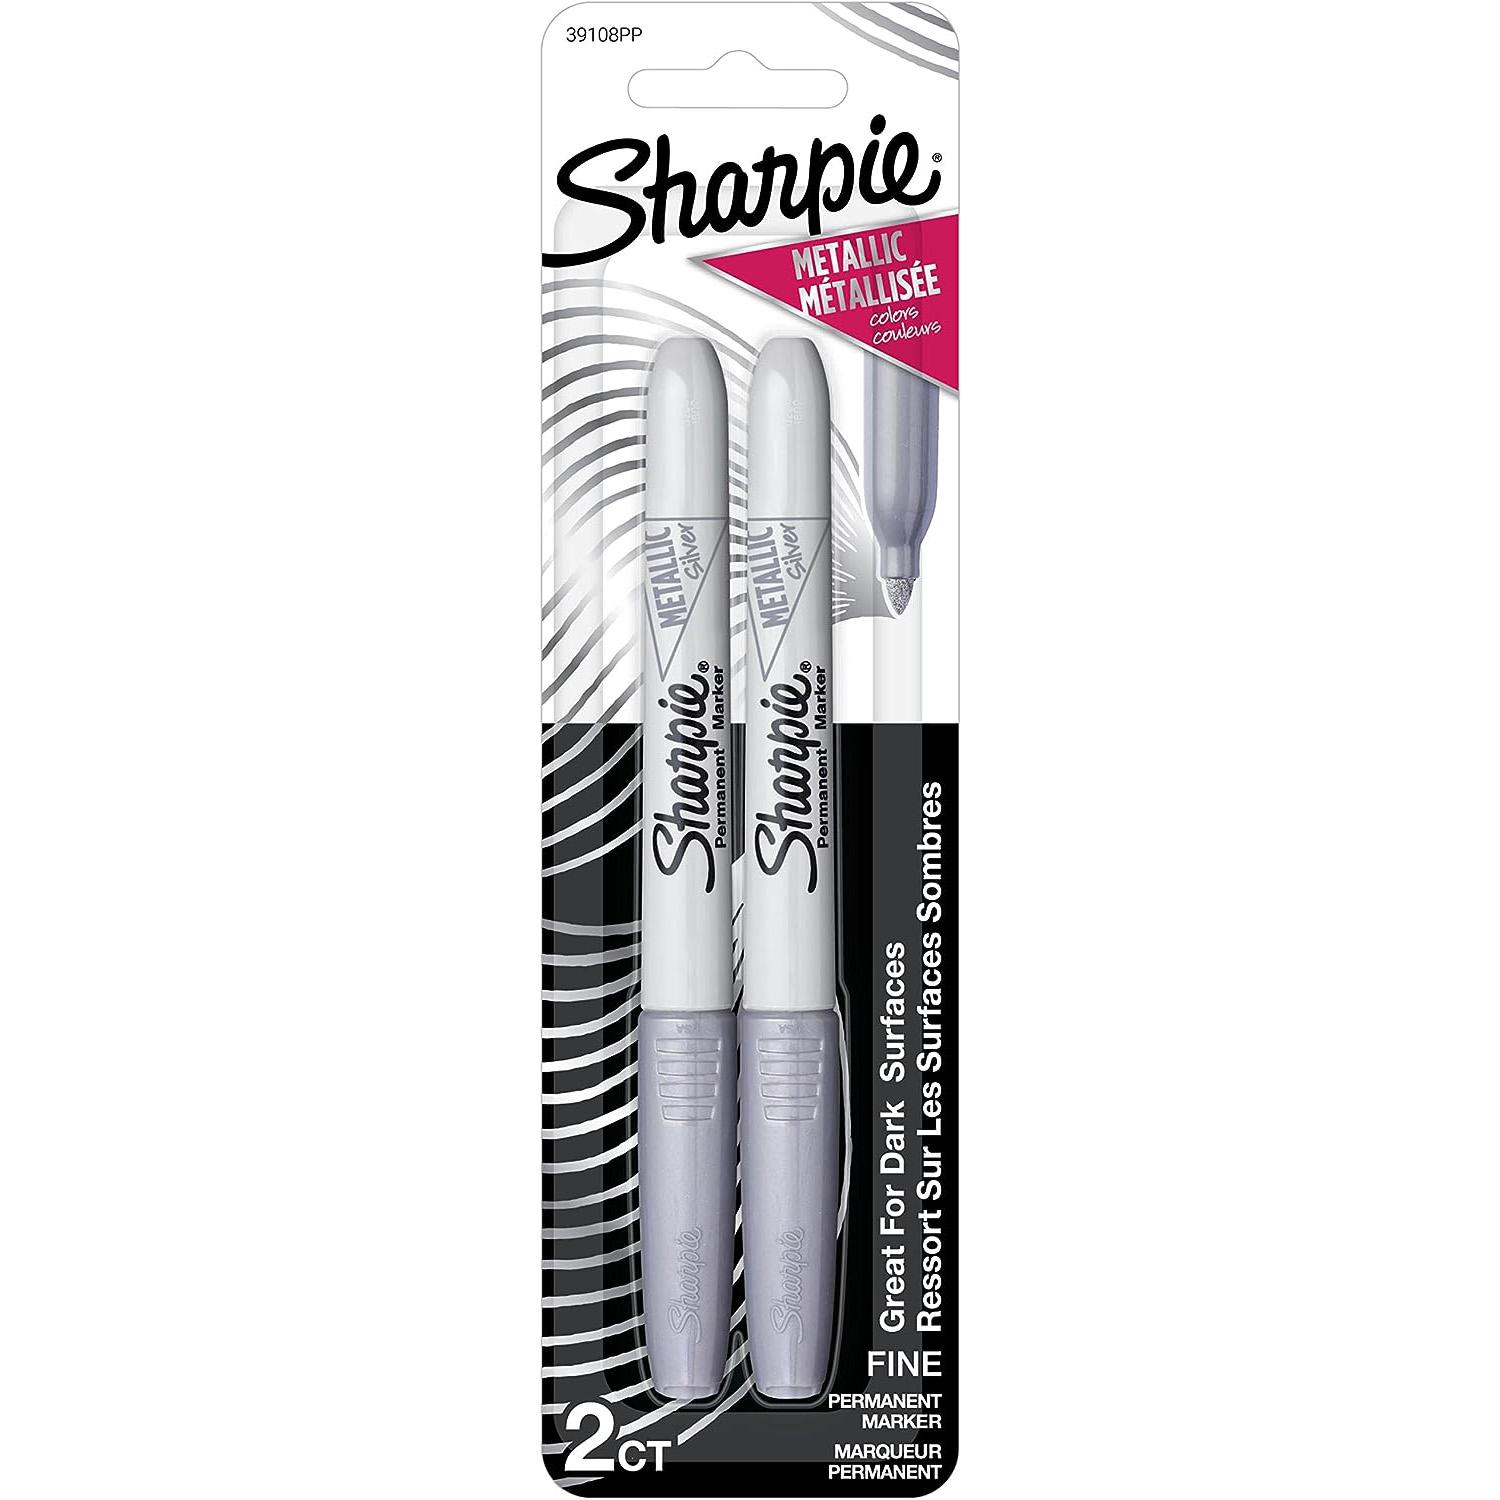 Sharpie Silver Metallic Permanent Markers 2 Pack for $2.81 Shipped